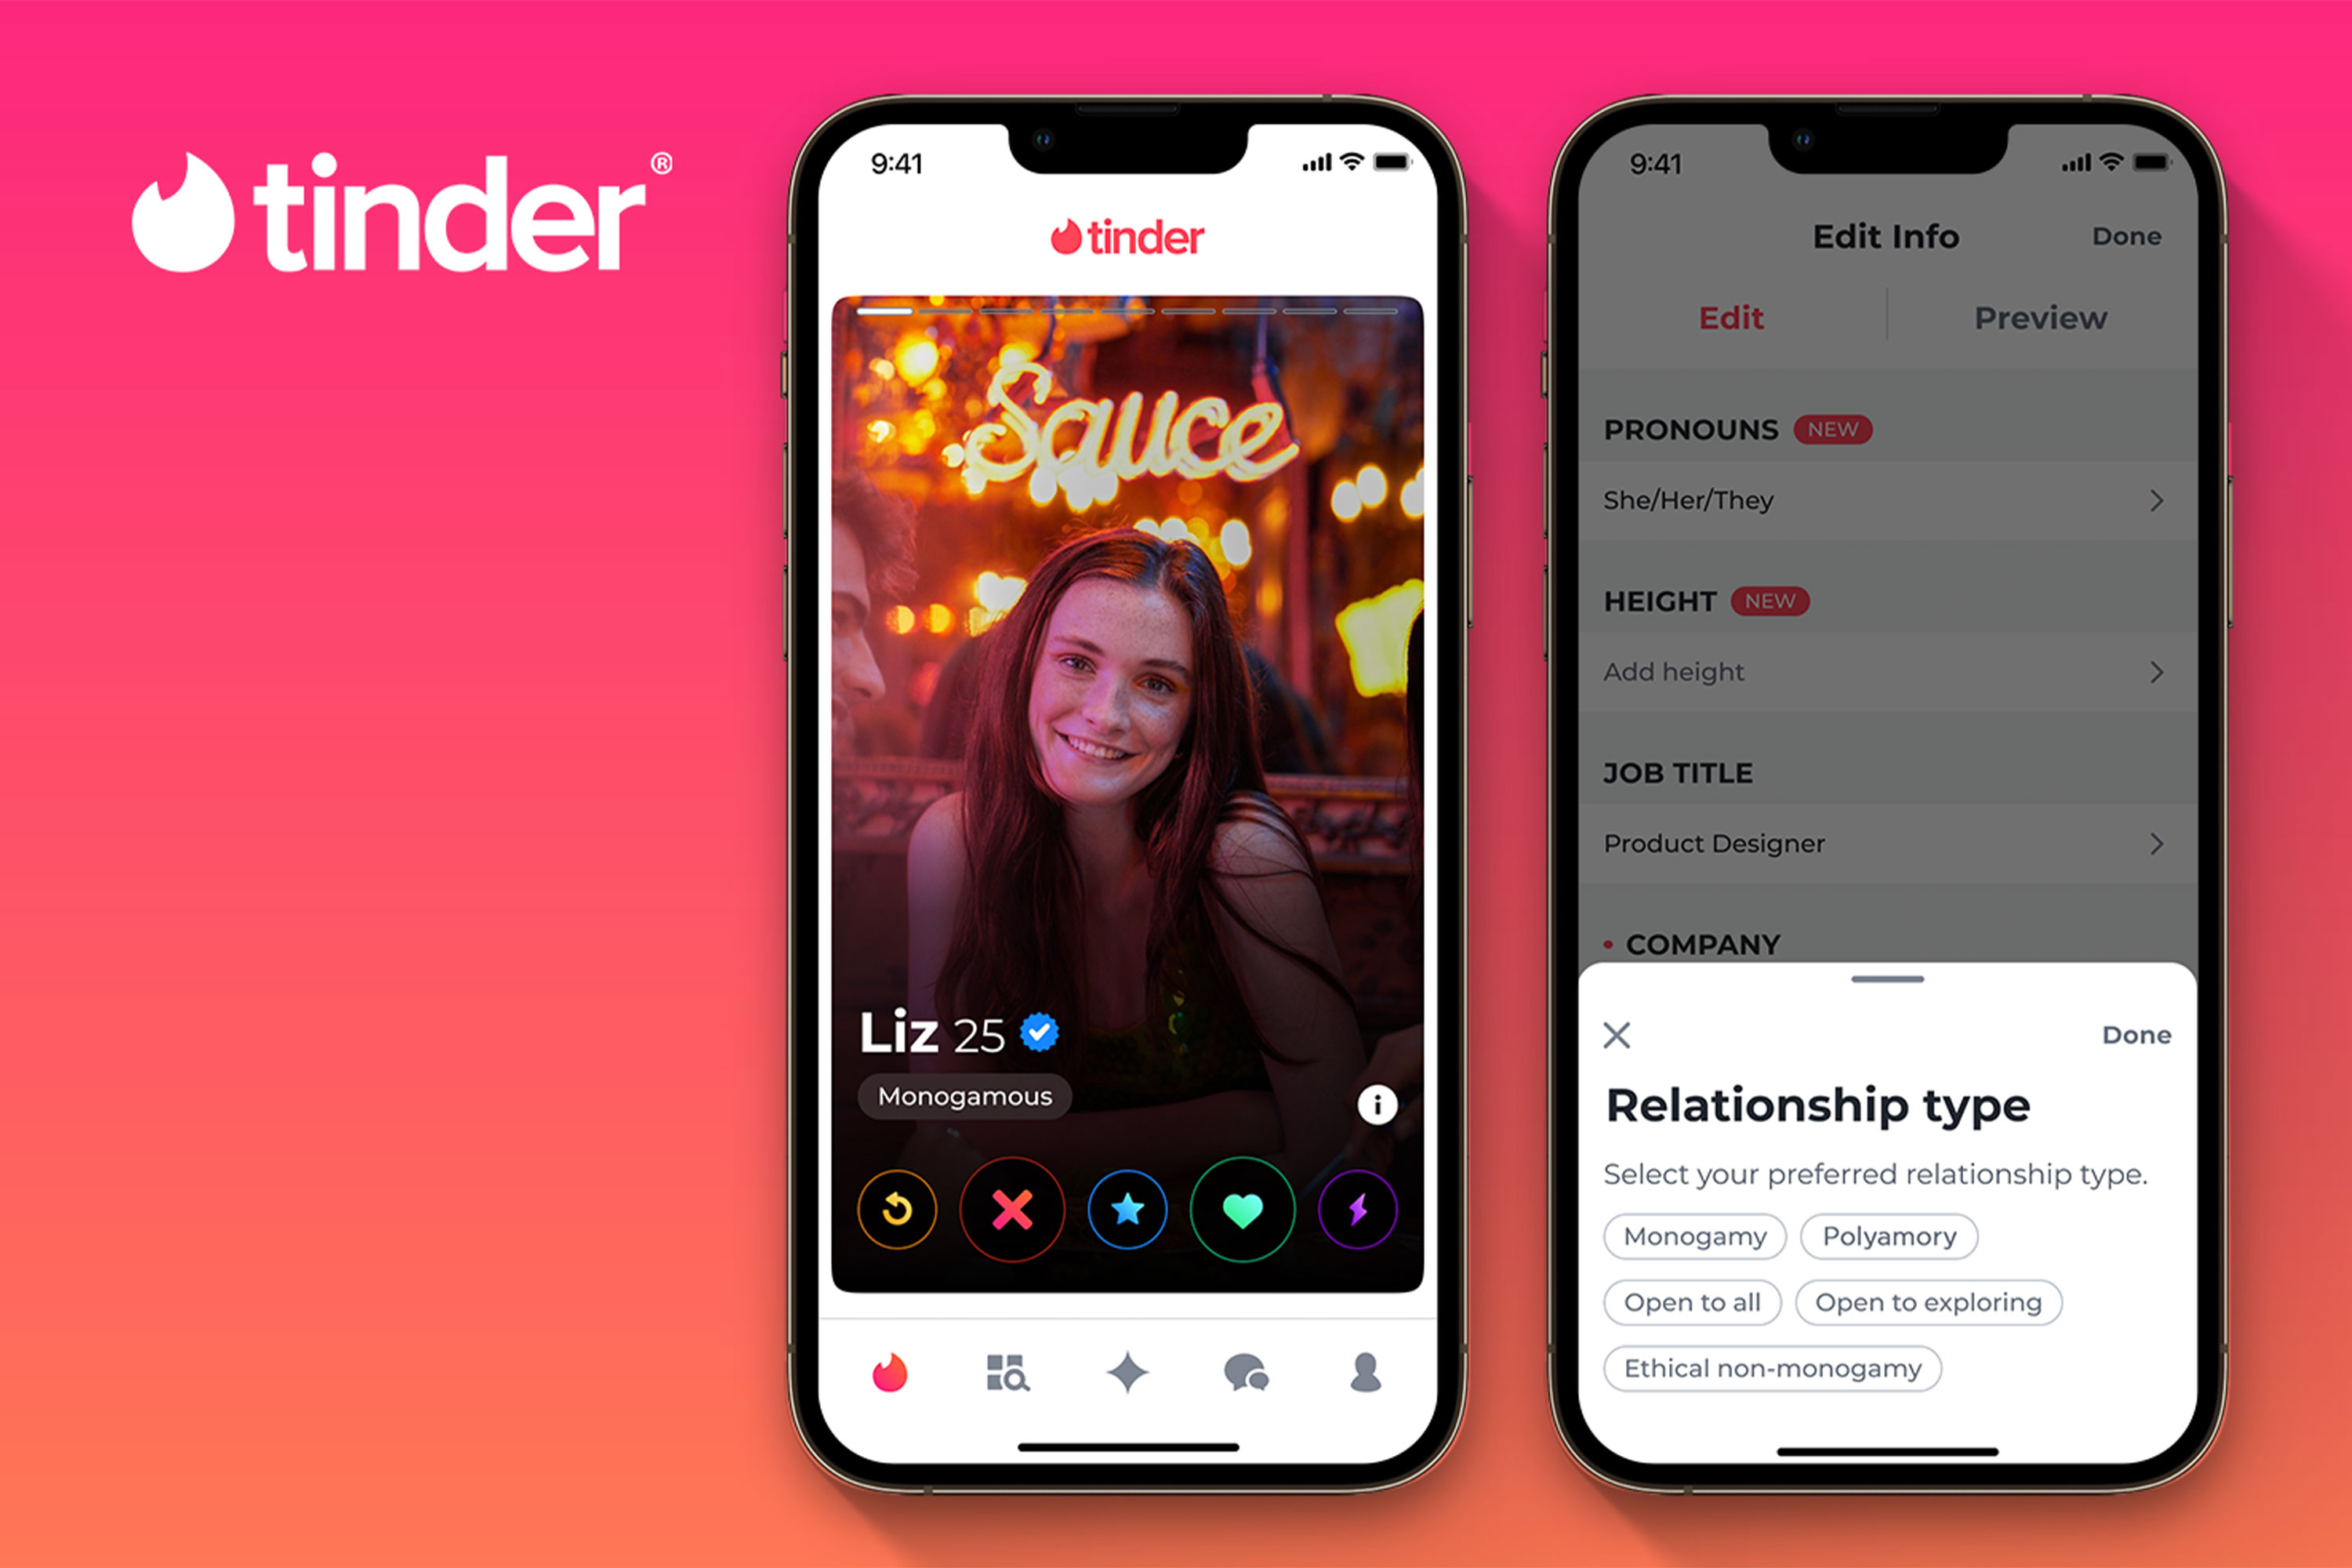 Your Tinder profile is about to change in 3 huge ways